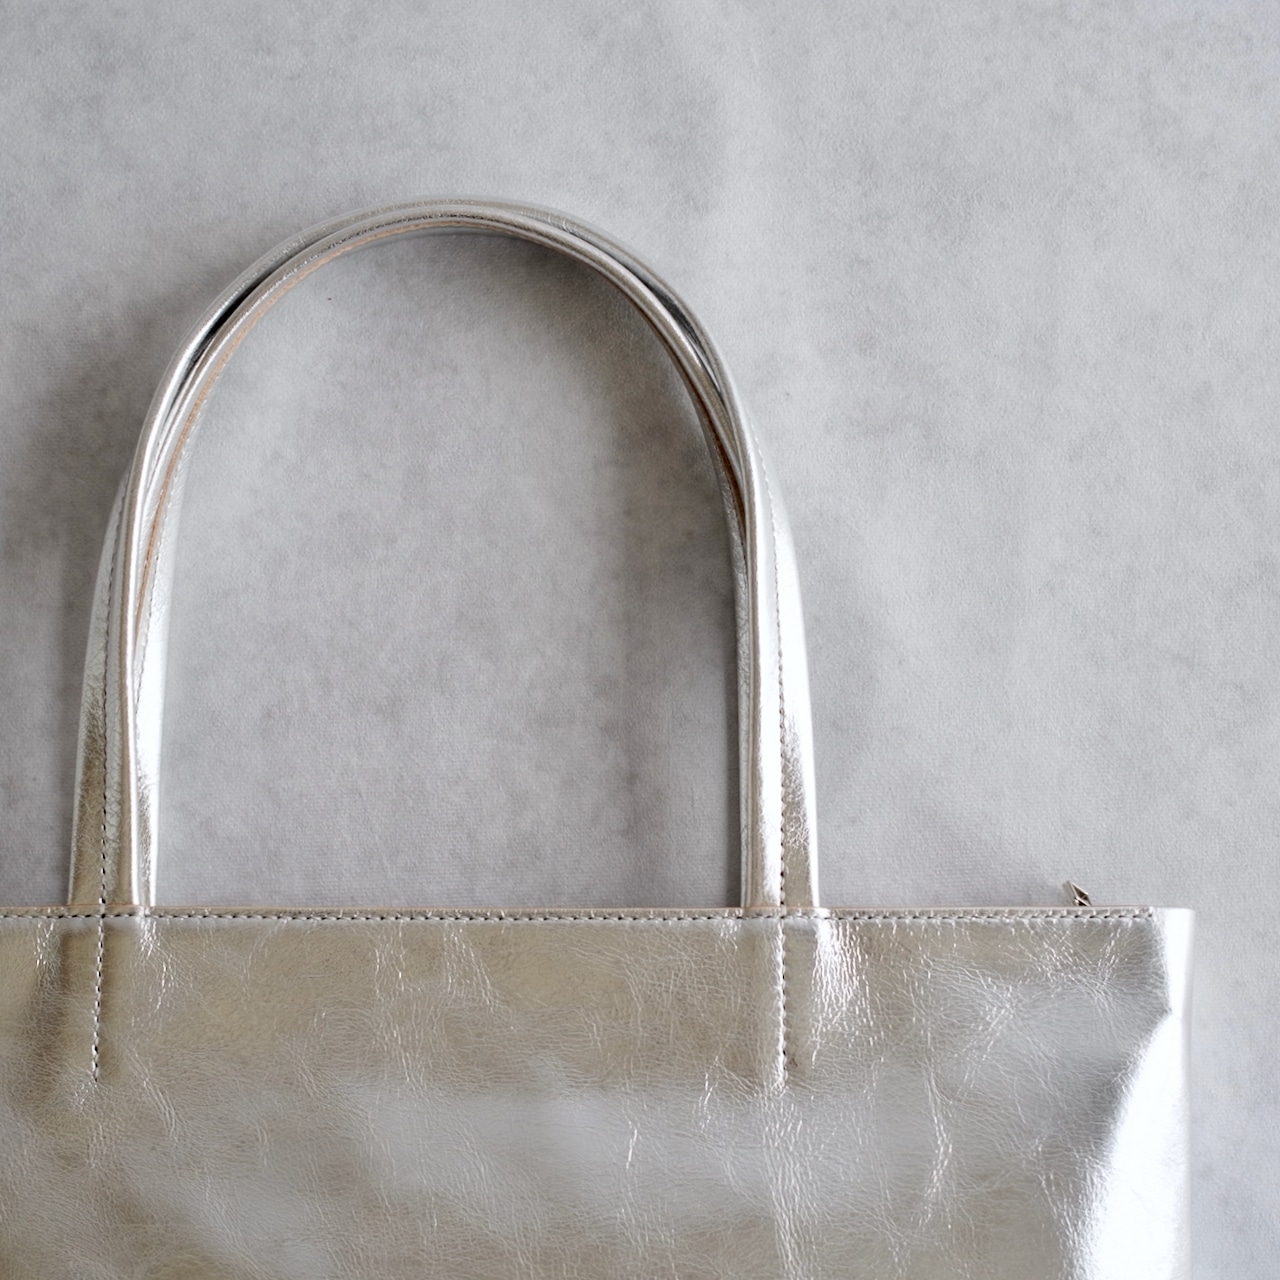 SS TOTE BAG 02 SILVER